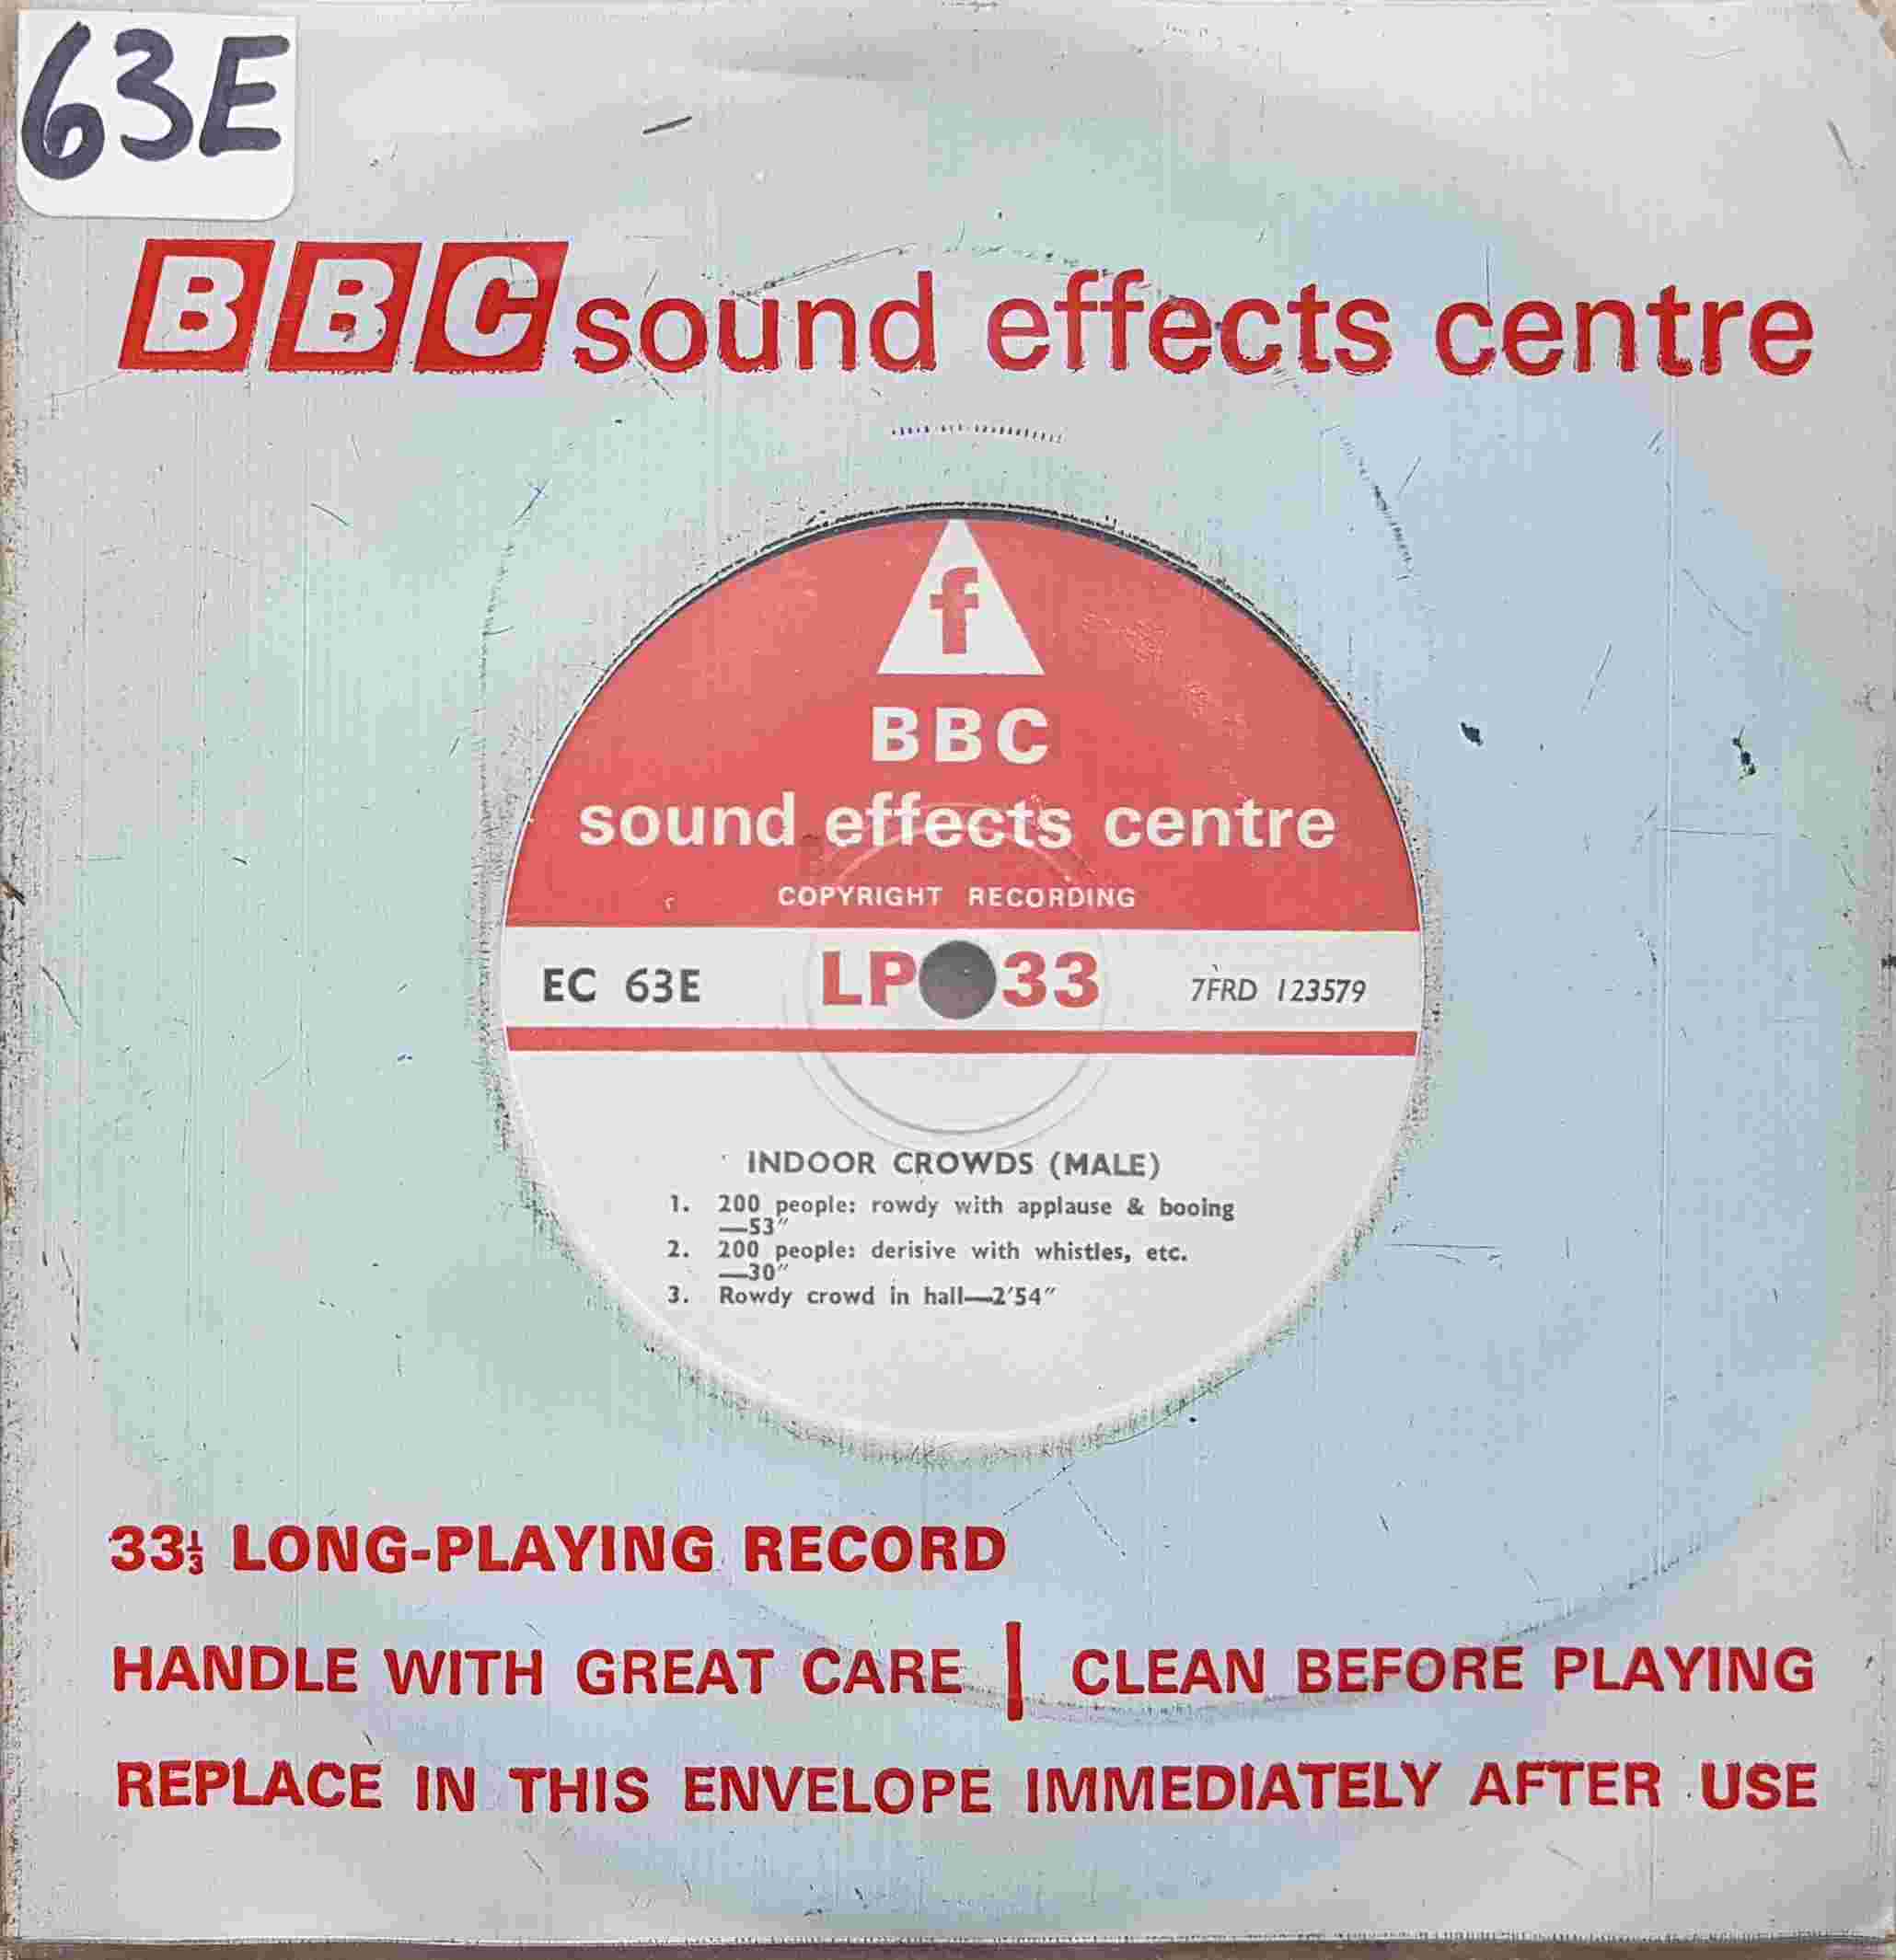 Picture of EC 63E Indoor crowds (Male) by artist Not registered from the BBC records and Tapes library